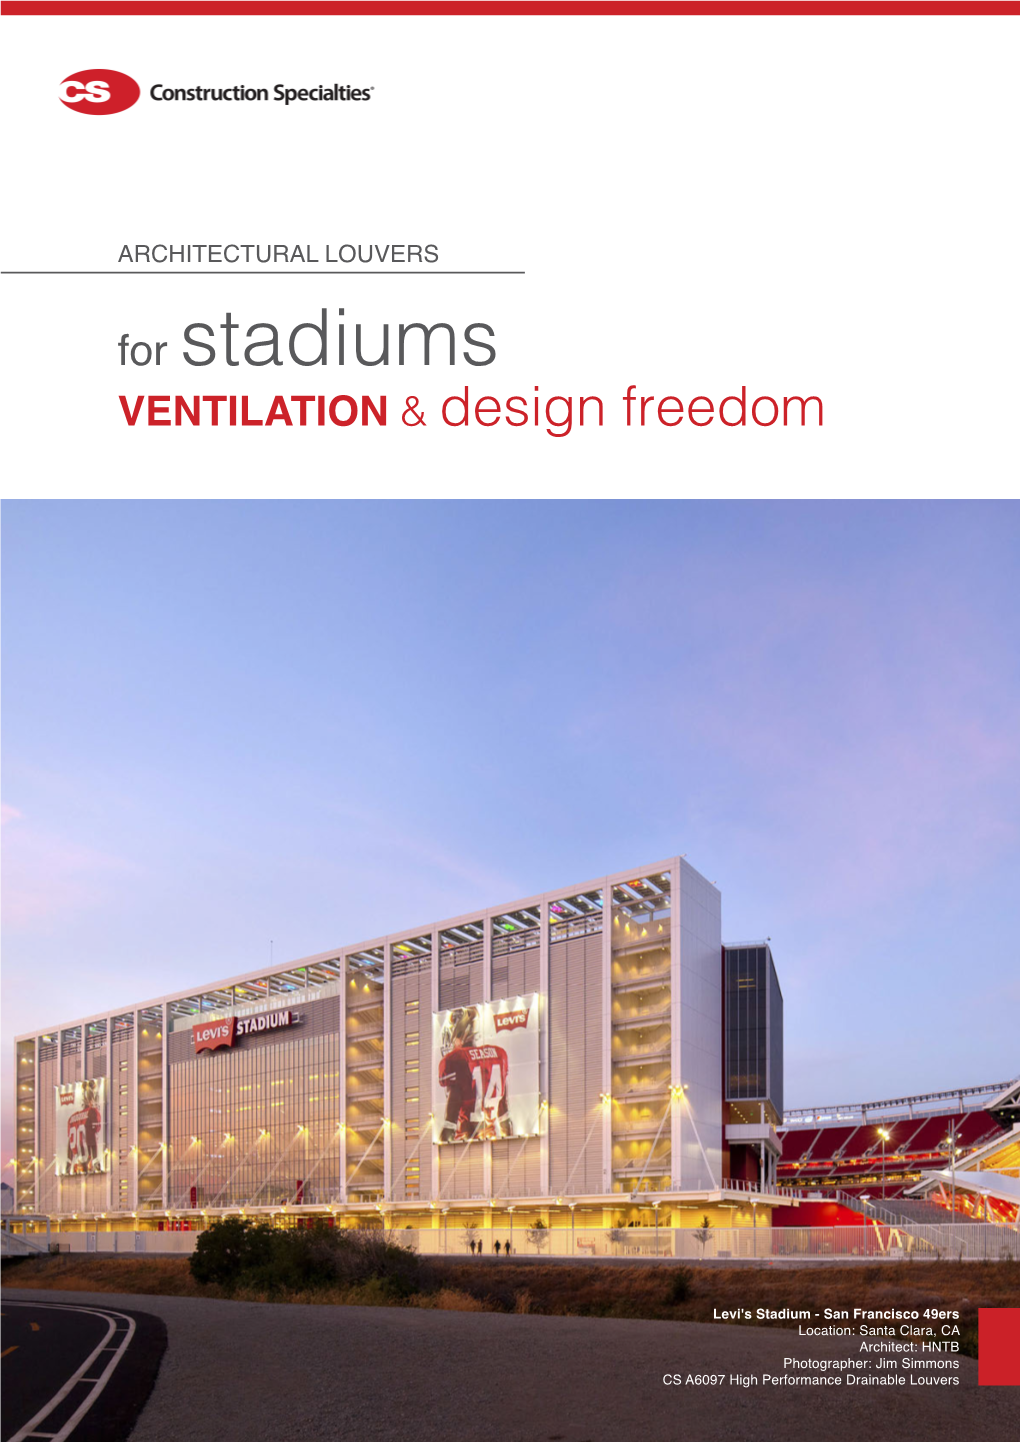 ARCHITECTURAL LOUVERS for Stadiums VENTILATION & Design Freedom